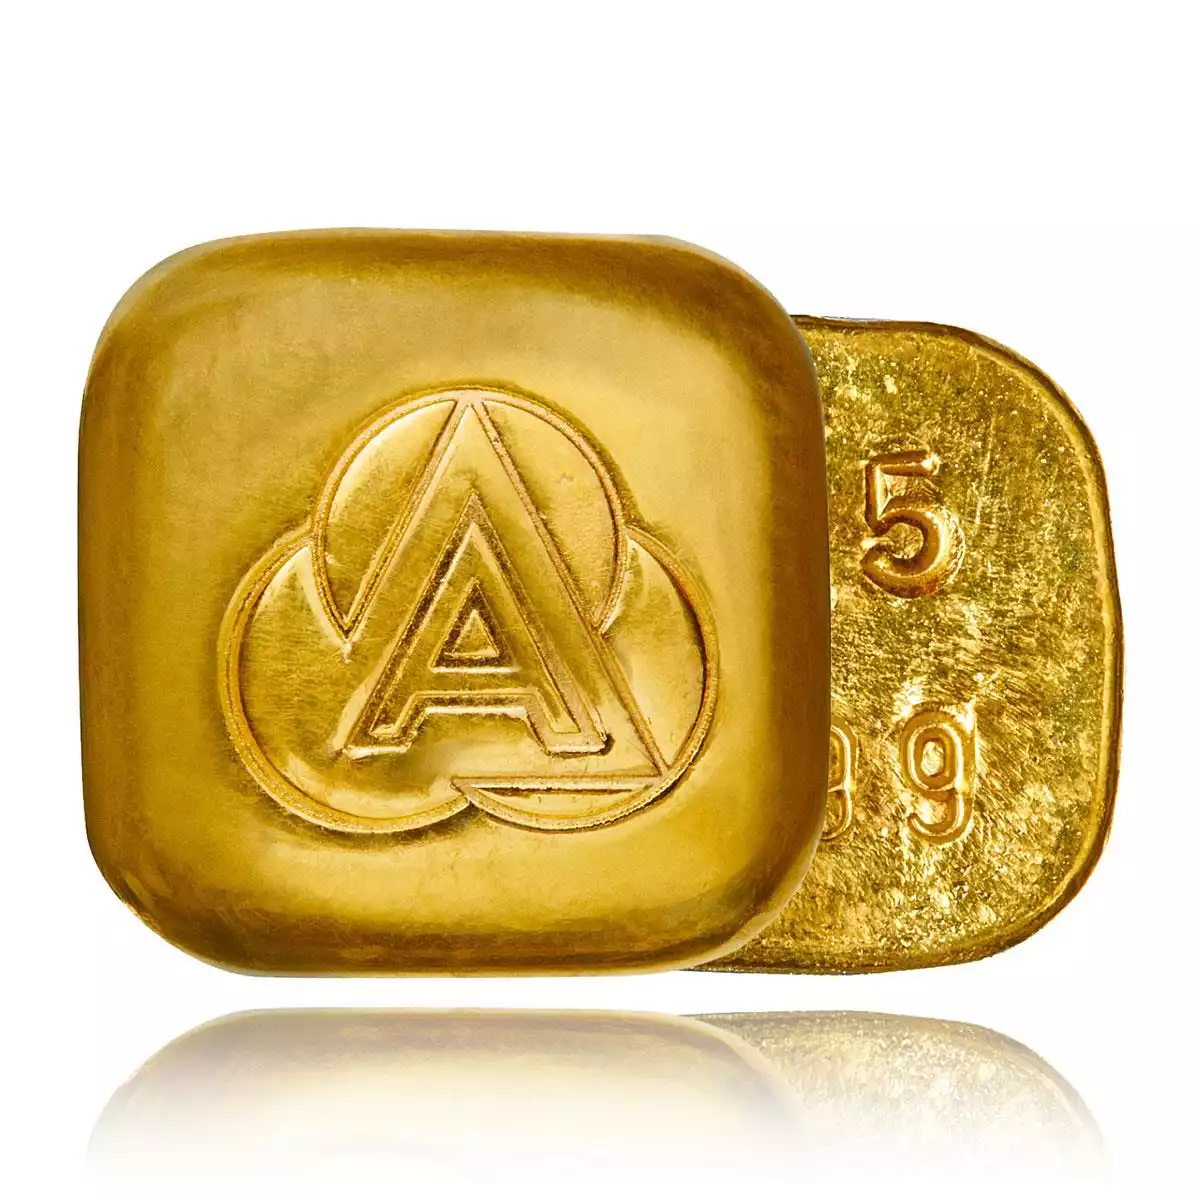 37.5g ainslie gold luong bullionthe gold luong is traditionally a very popular bar in asian markets and increasingly here in australia too. at 37.5g c...